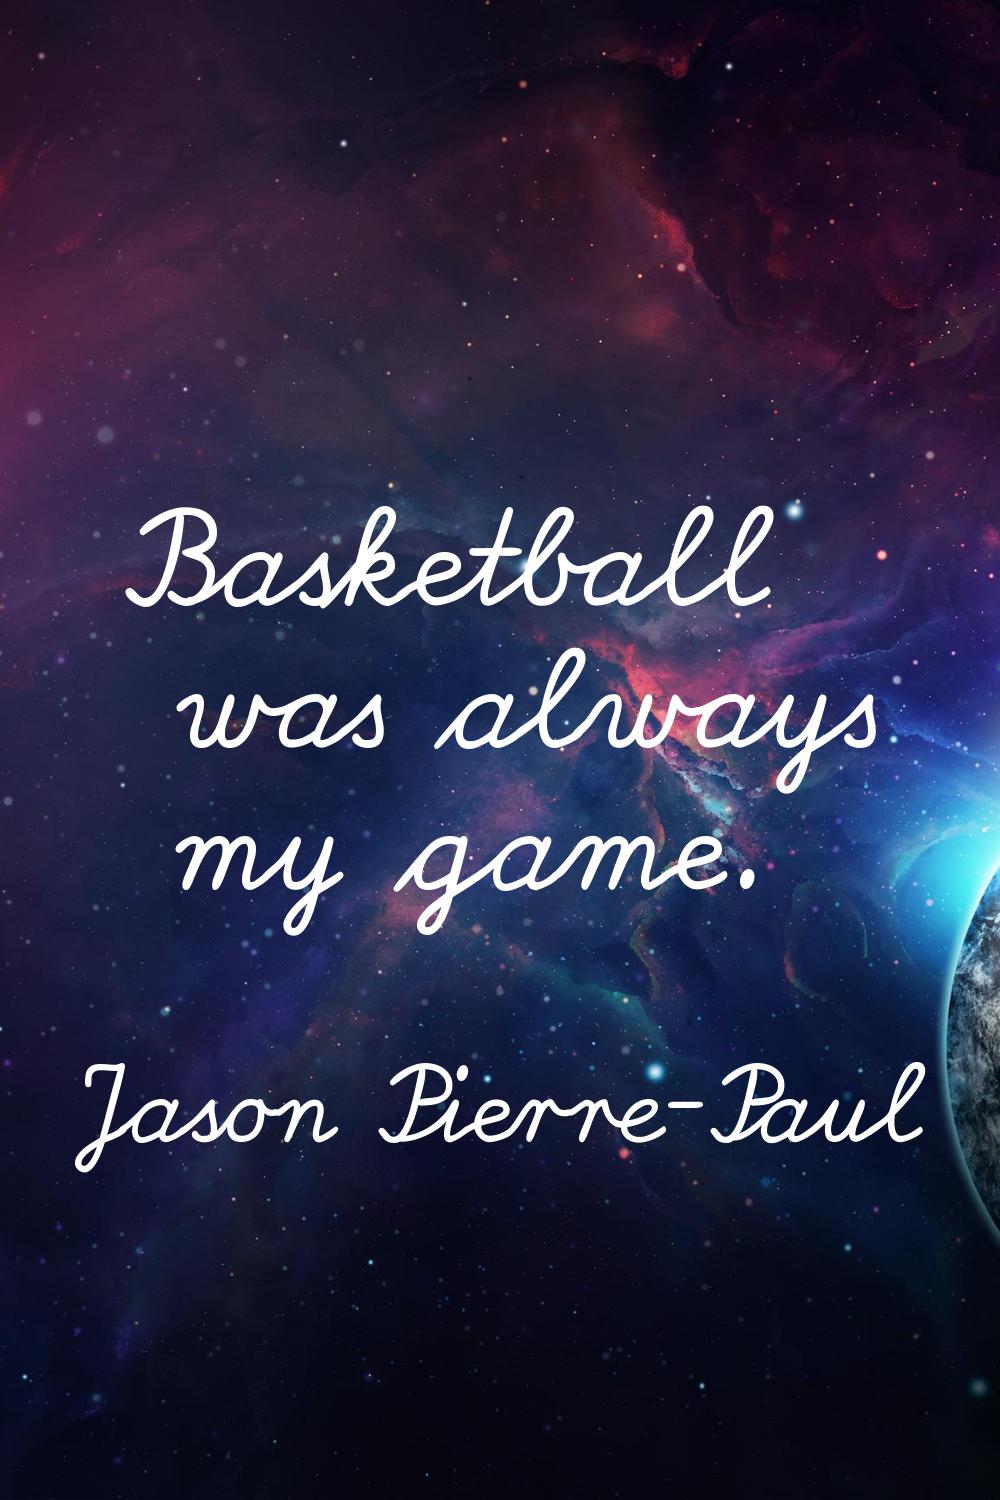 Basketball was always my game.